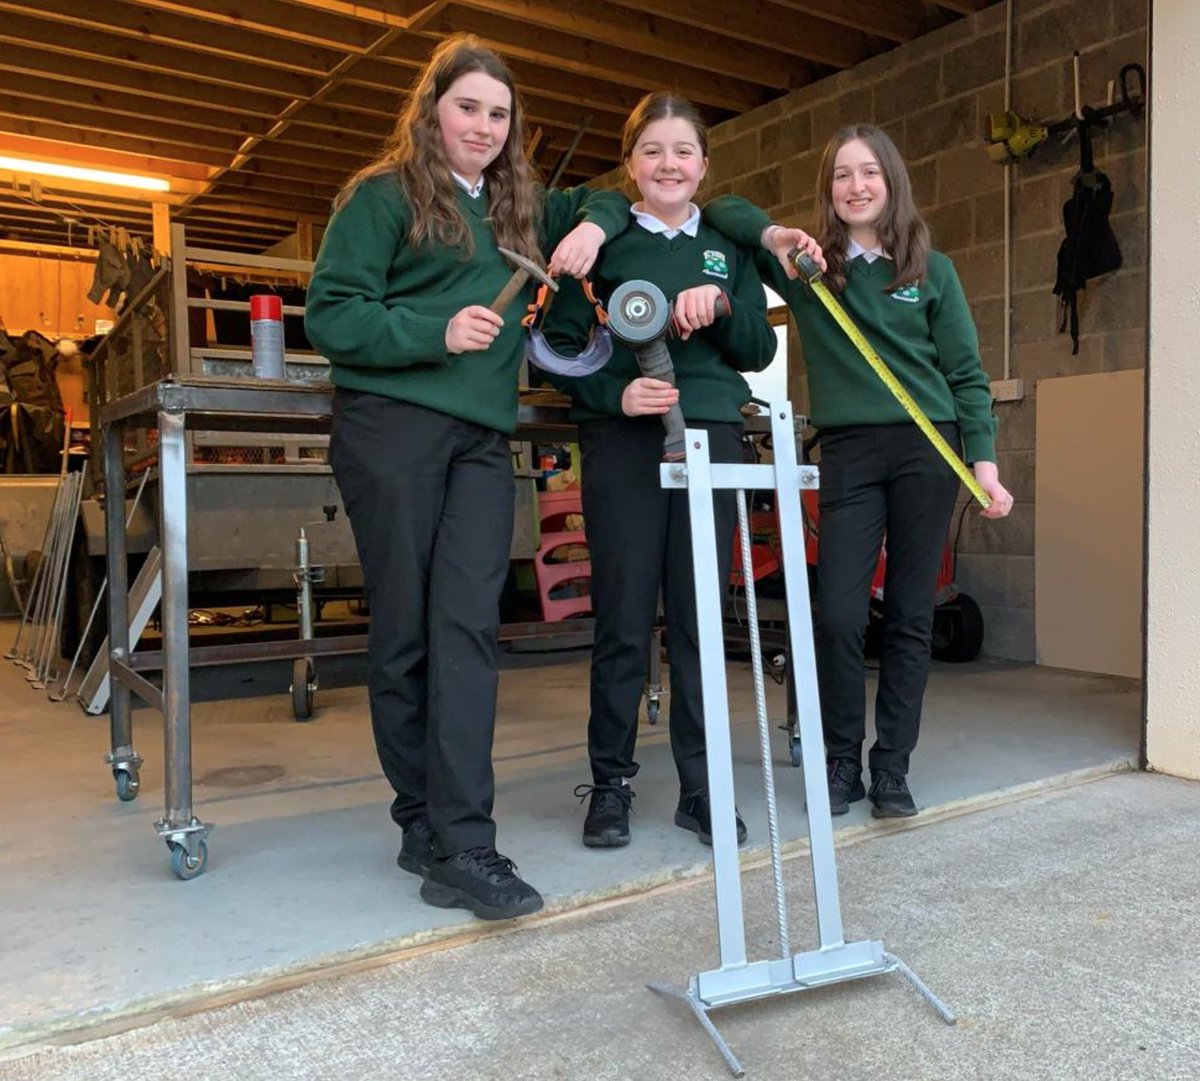 #TeamKerry 

Well done to Junior Category winners  Freya, Amy & Alex.
Their product -  “The Grasper” is a wonderful product which is could be a real game changer for Health & Safety on the Farm.

See you in Croke Park!